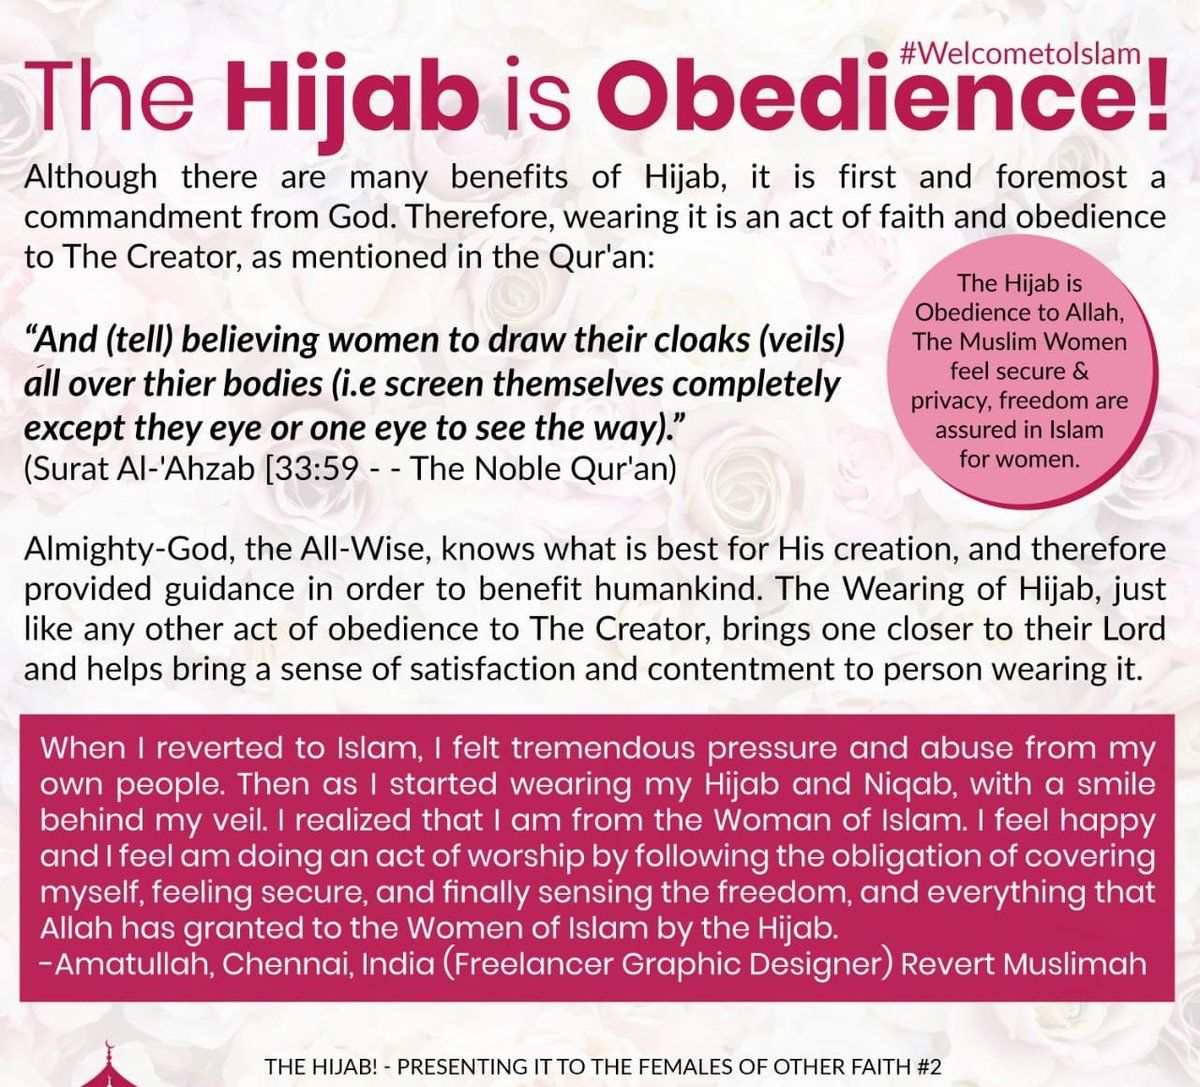 The Hijab - Presenting it to the females of other Faith